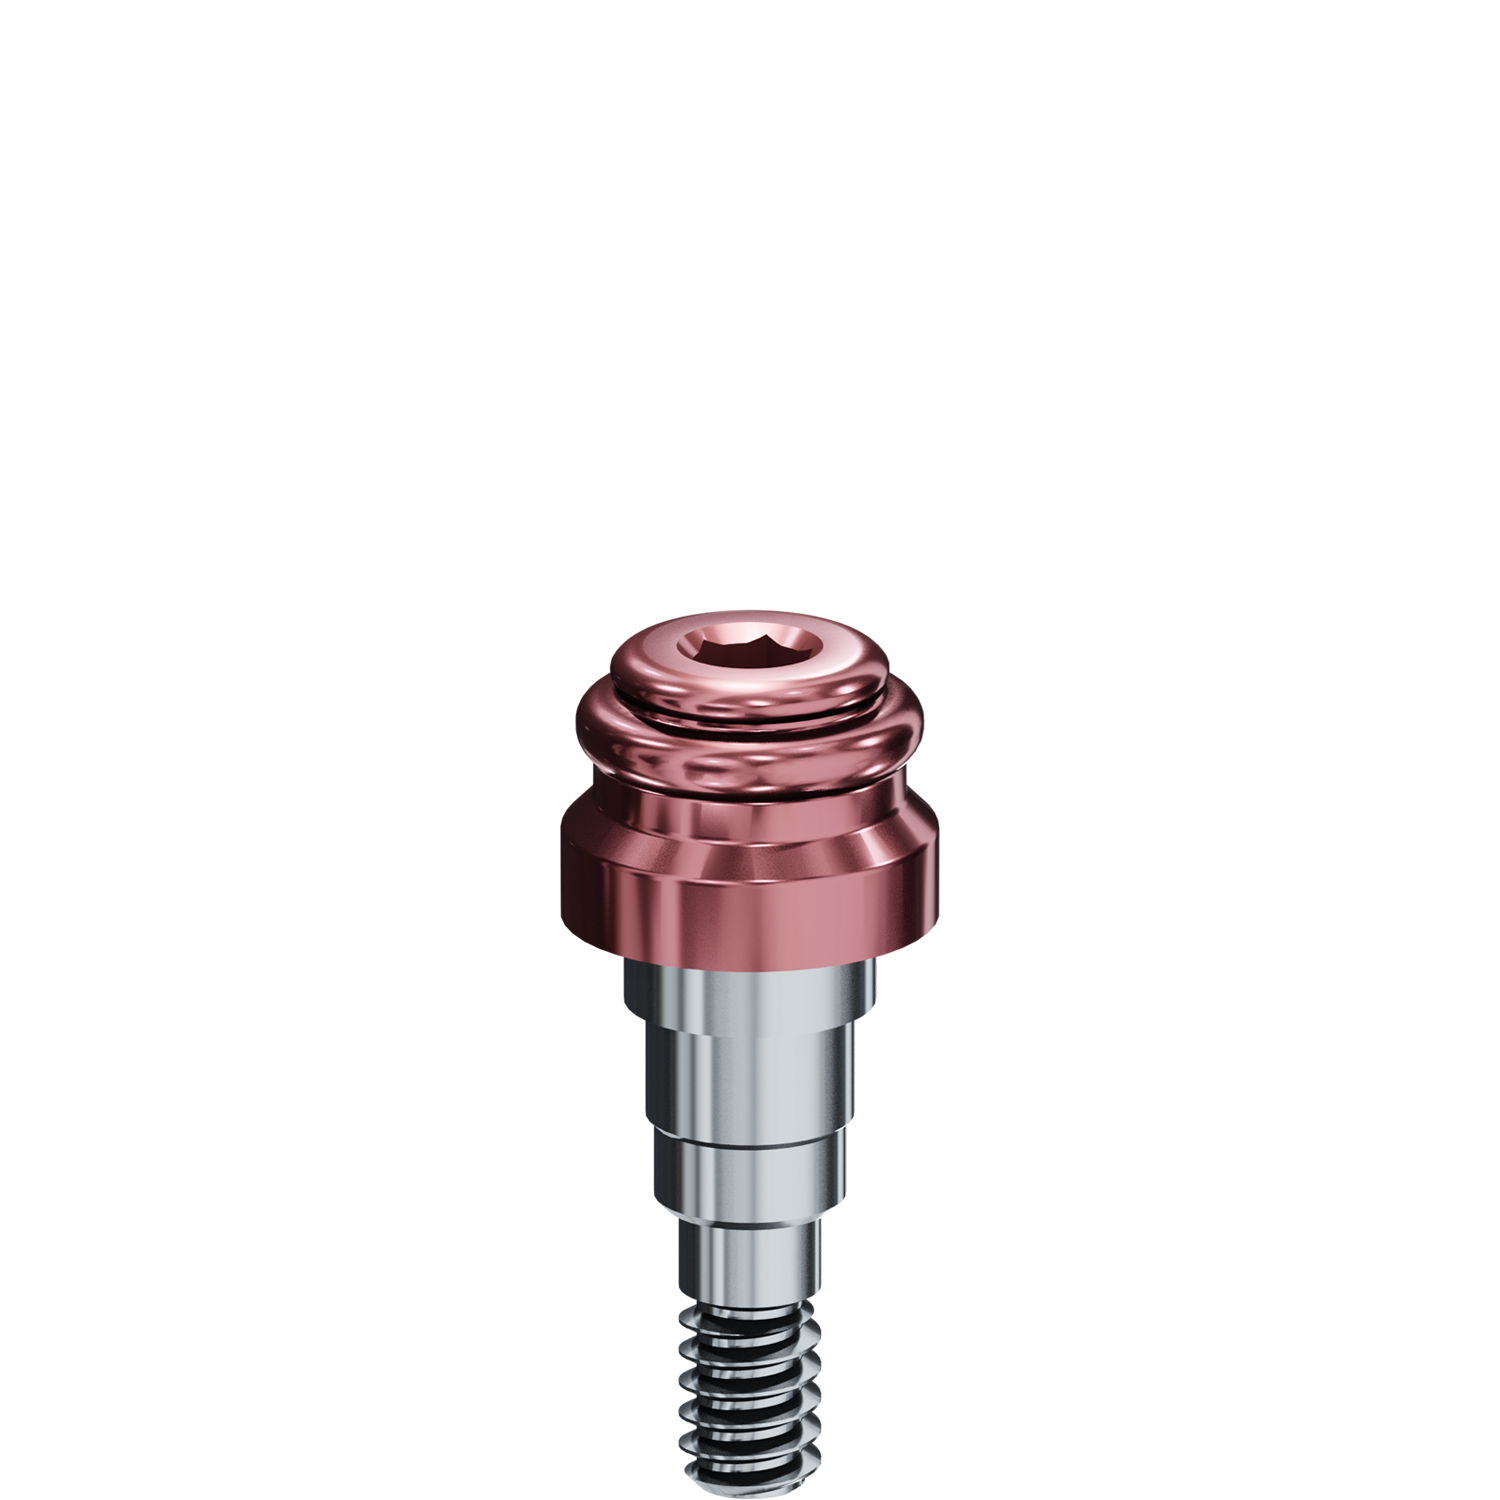 R-Tx Attachment System - Biomet 3i® - 4.1mm Certain Connection - 0.048" Drive - 5.0mm